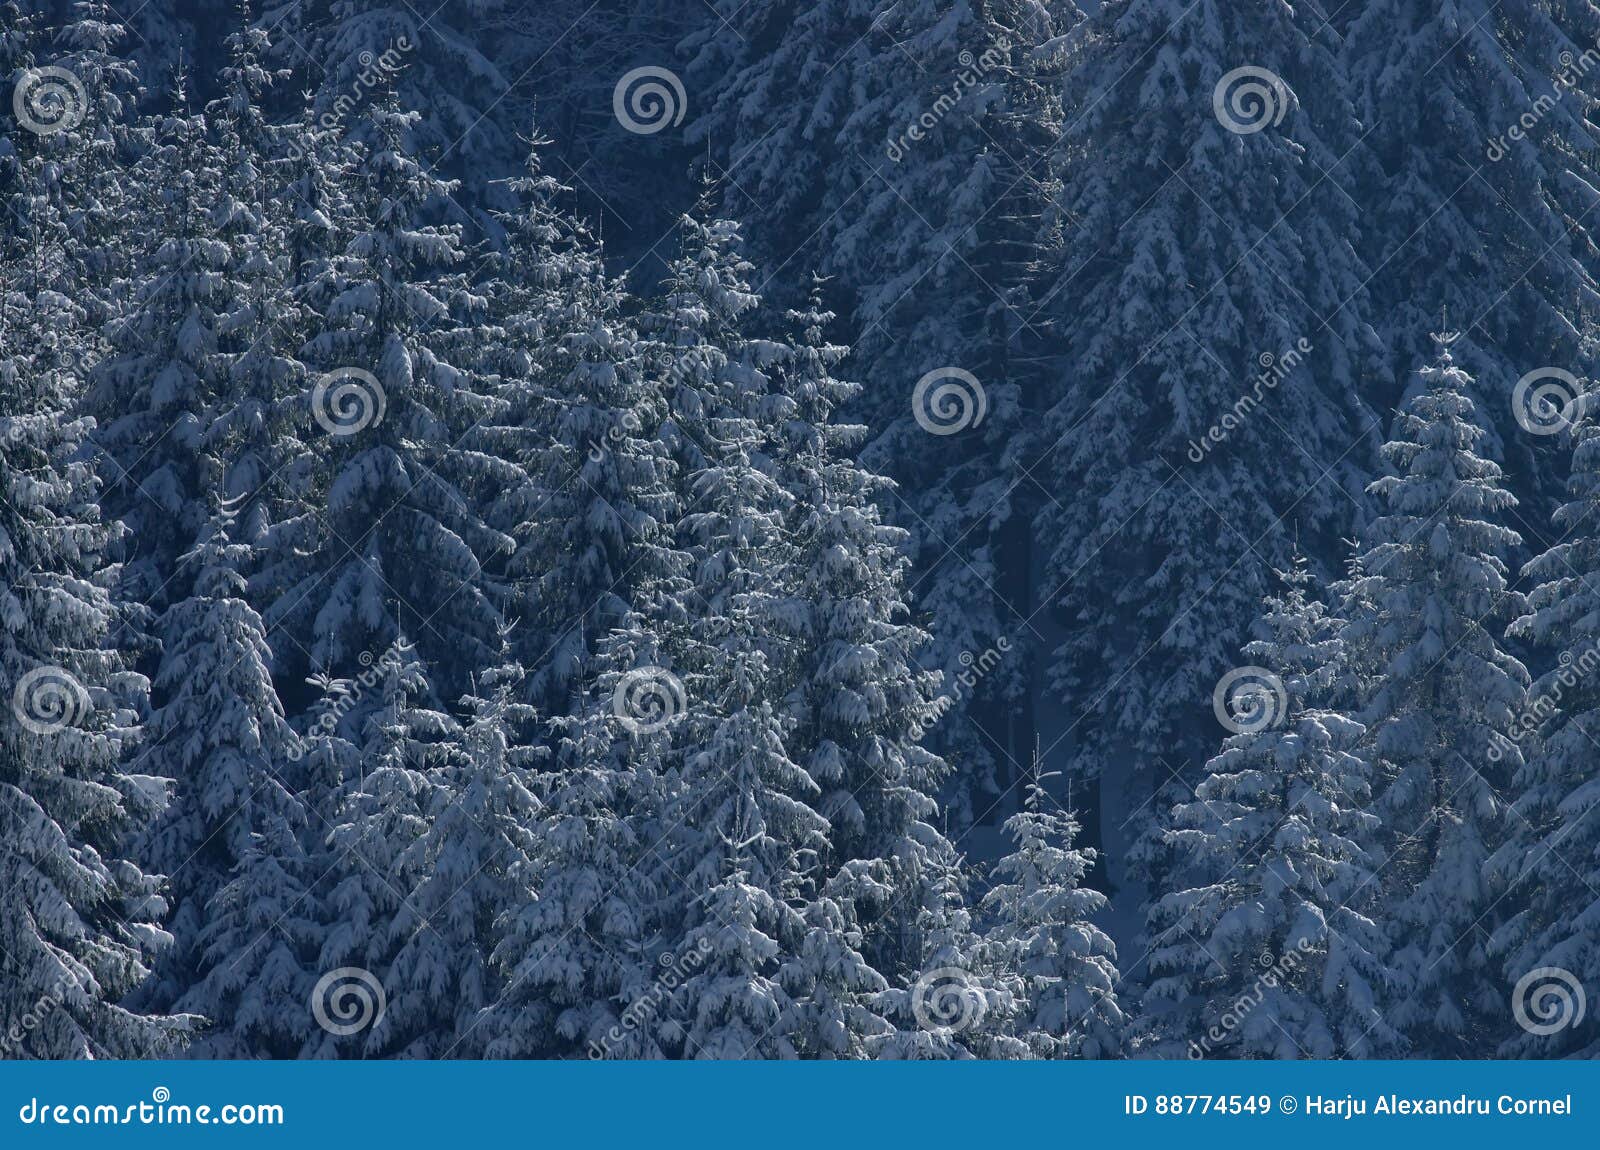 christmas trees in the snow